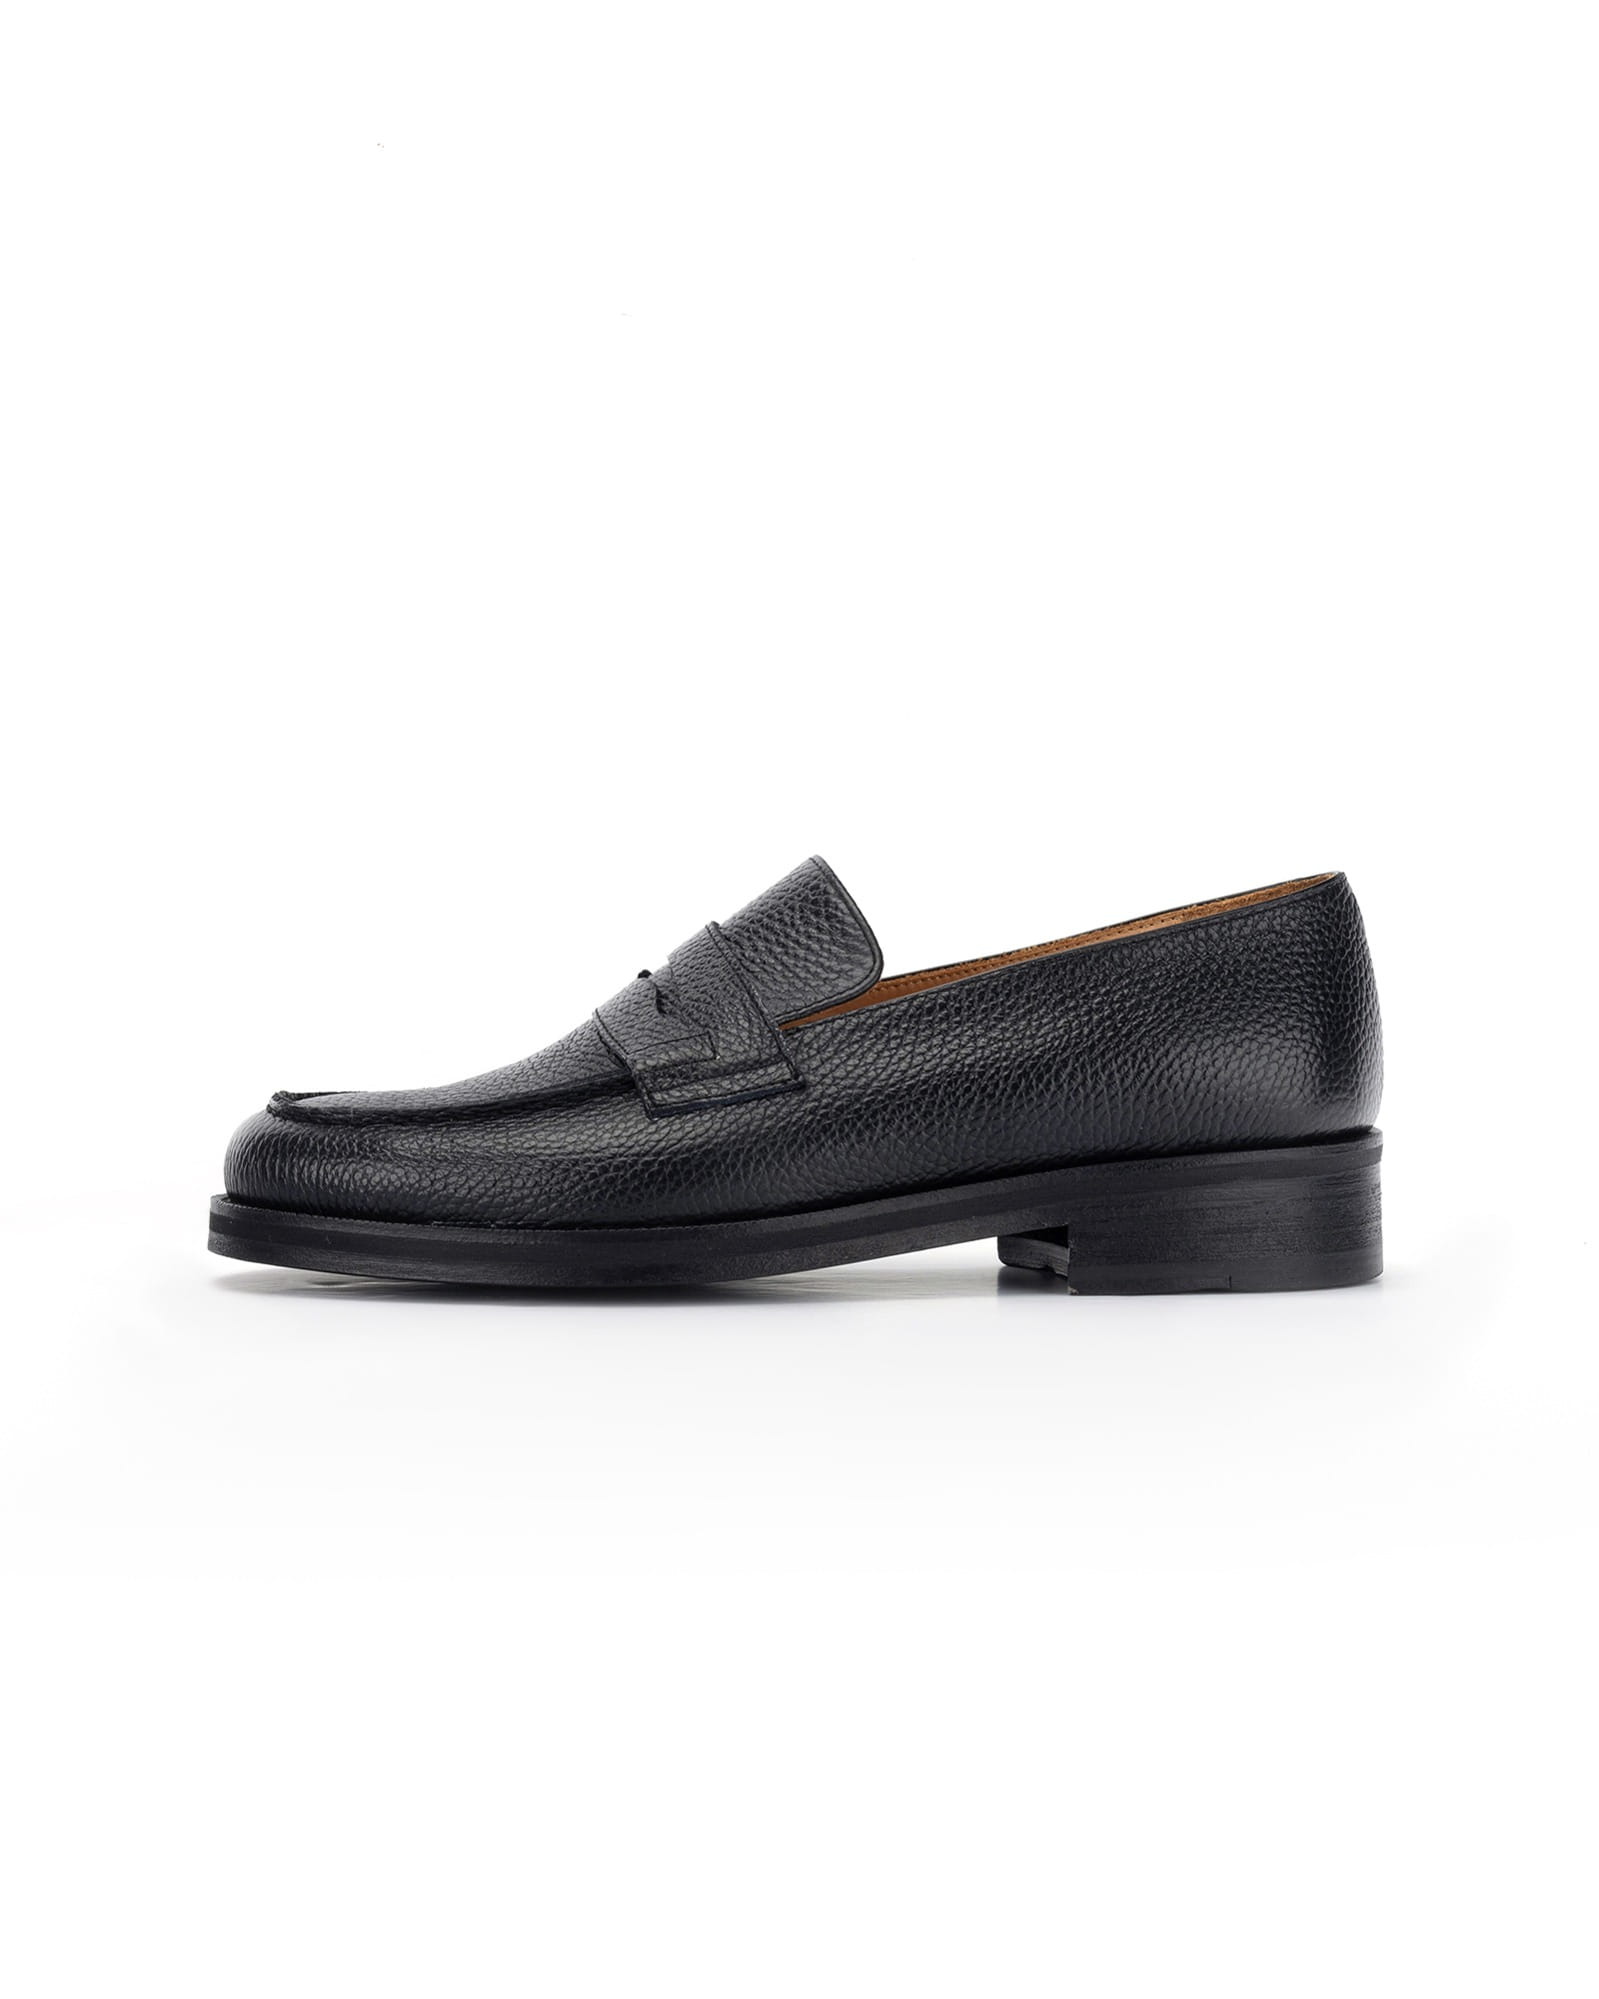 Penny Loafers (Black)